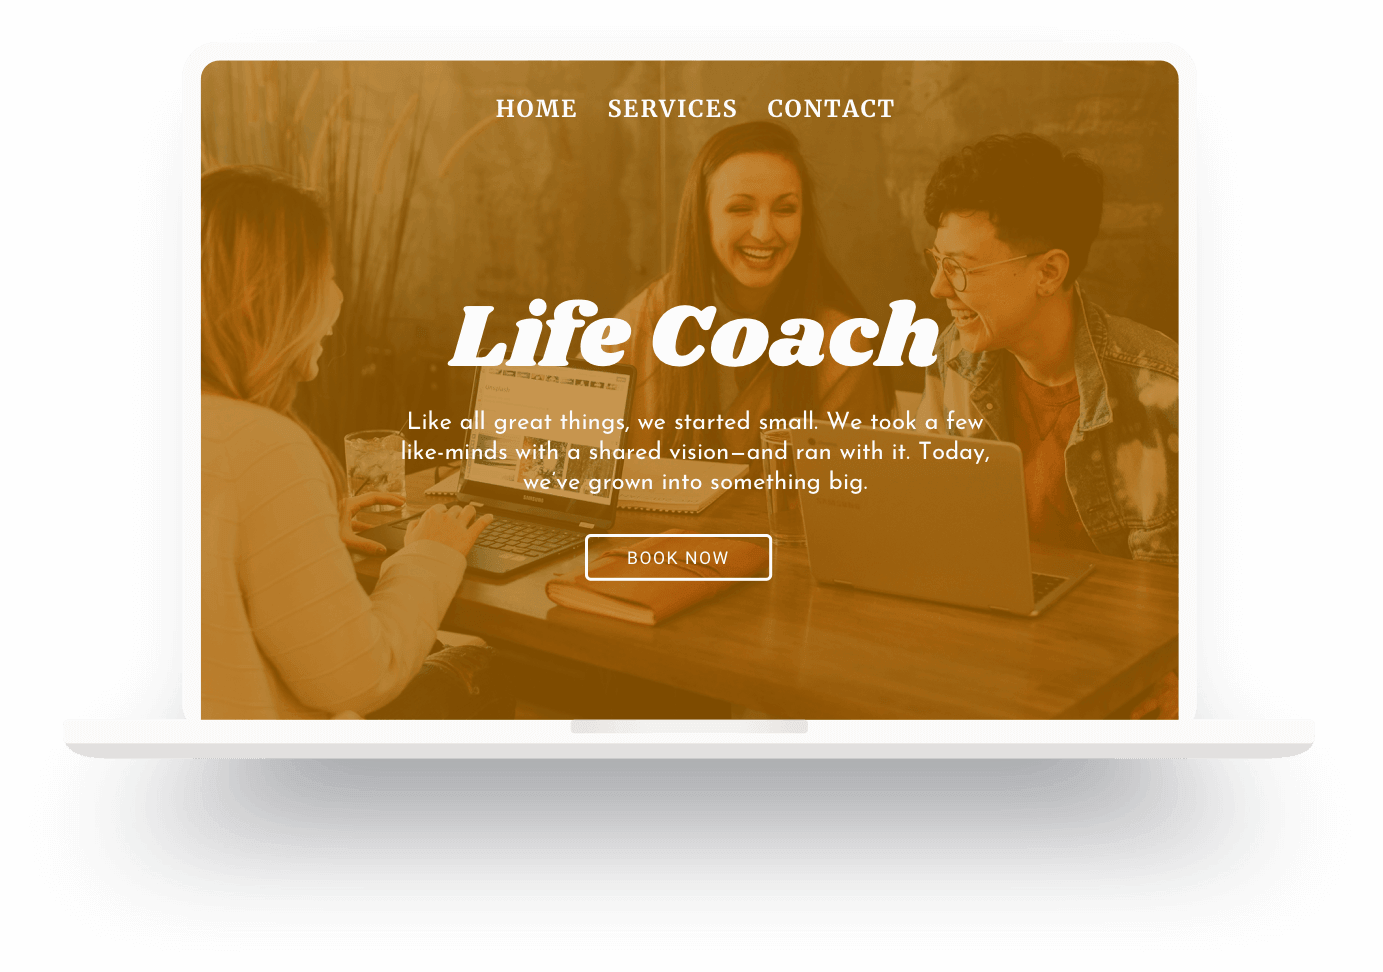 An example of a life coaching website built with Jimdo